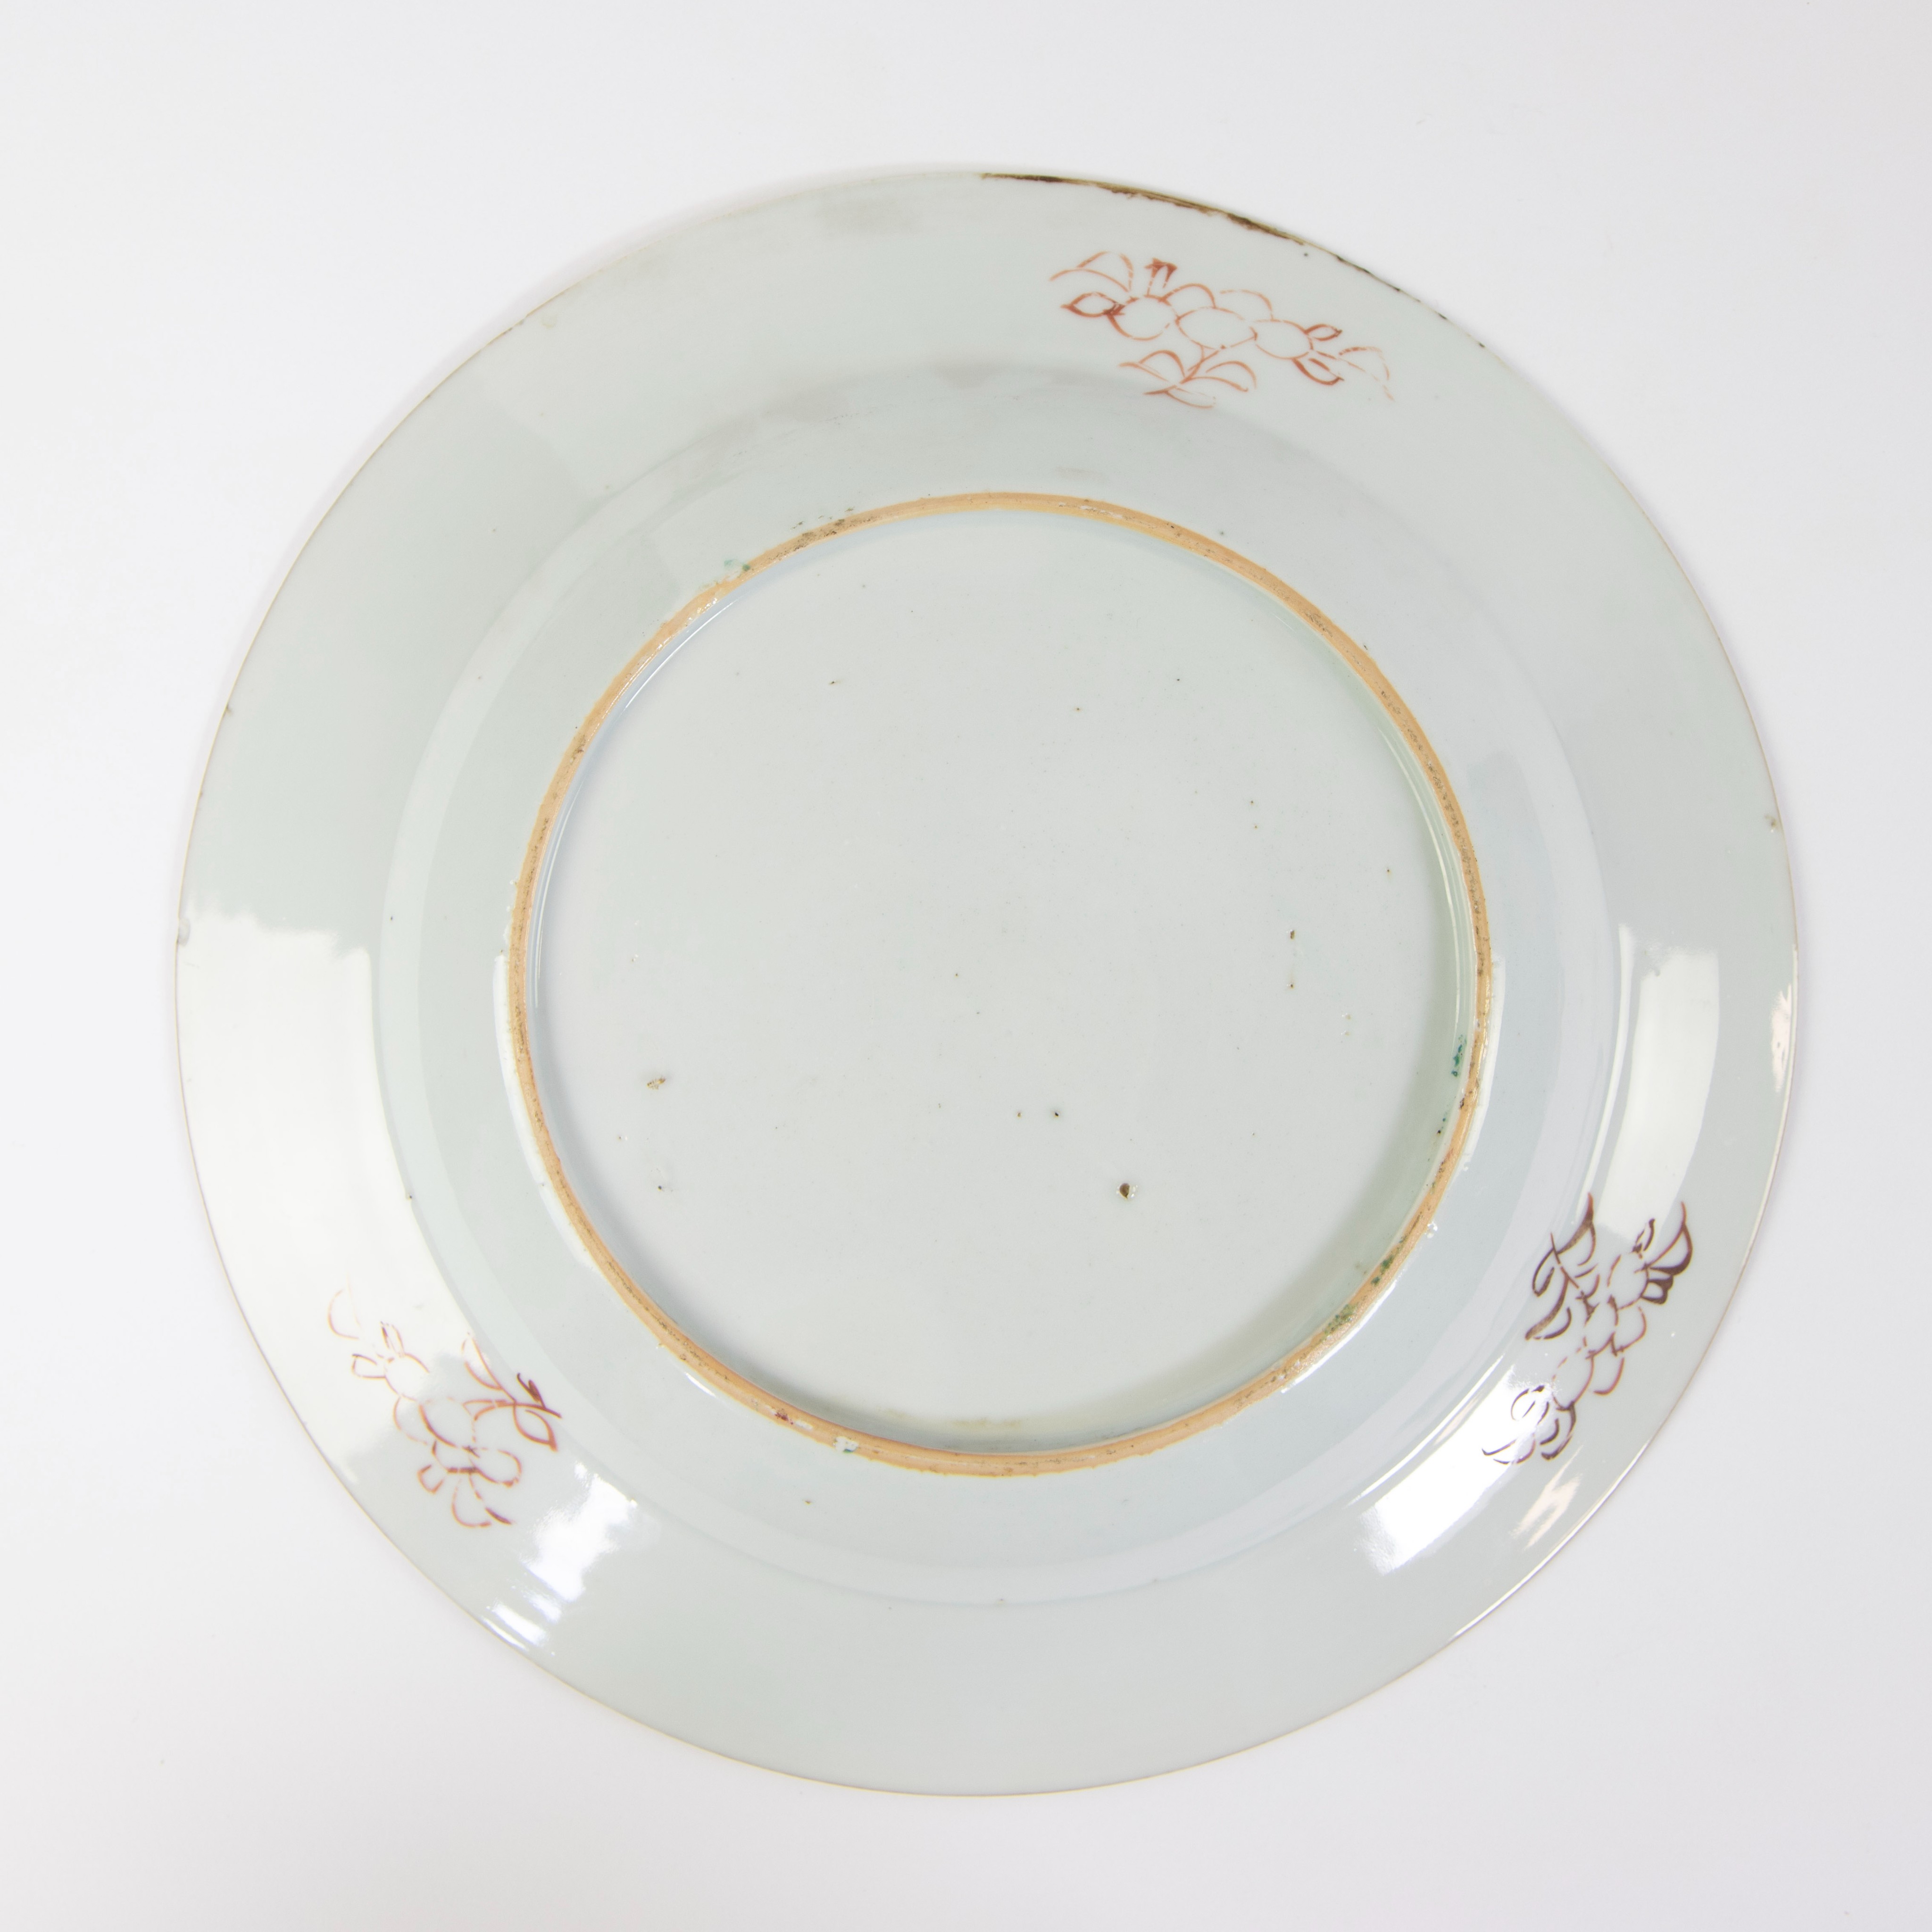 Lot of 5 Chinese famille rose plates, 18th century - Image 11 of 18